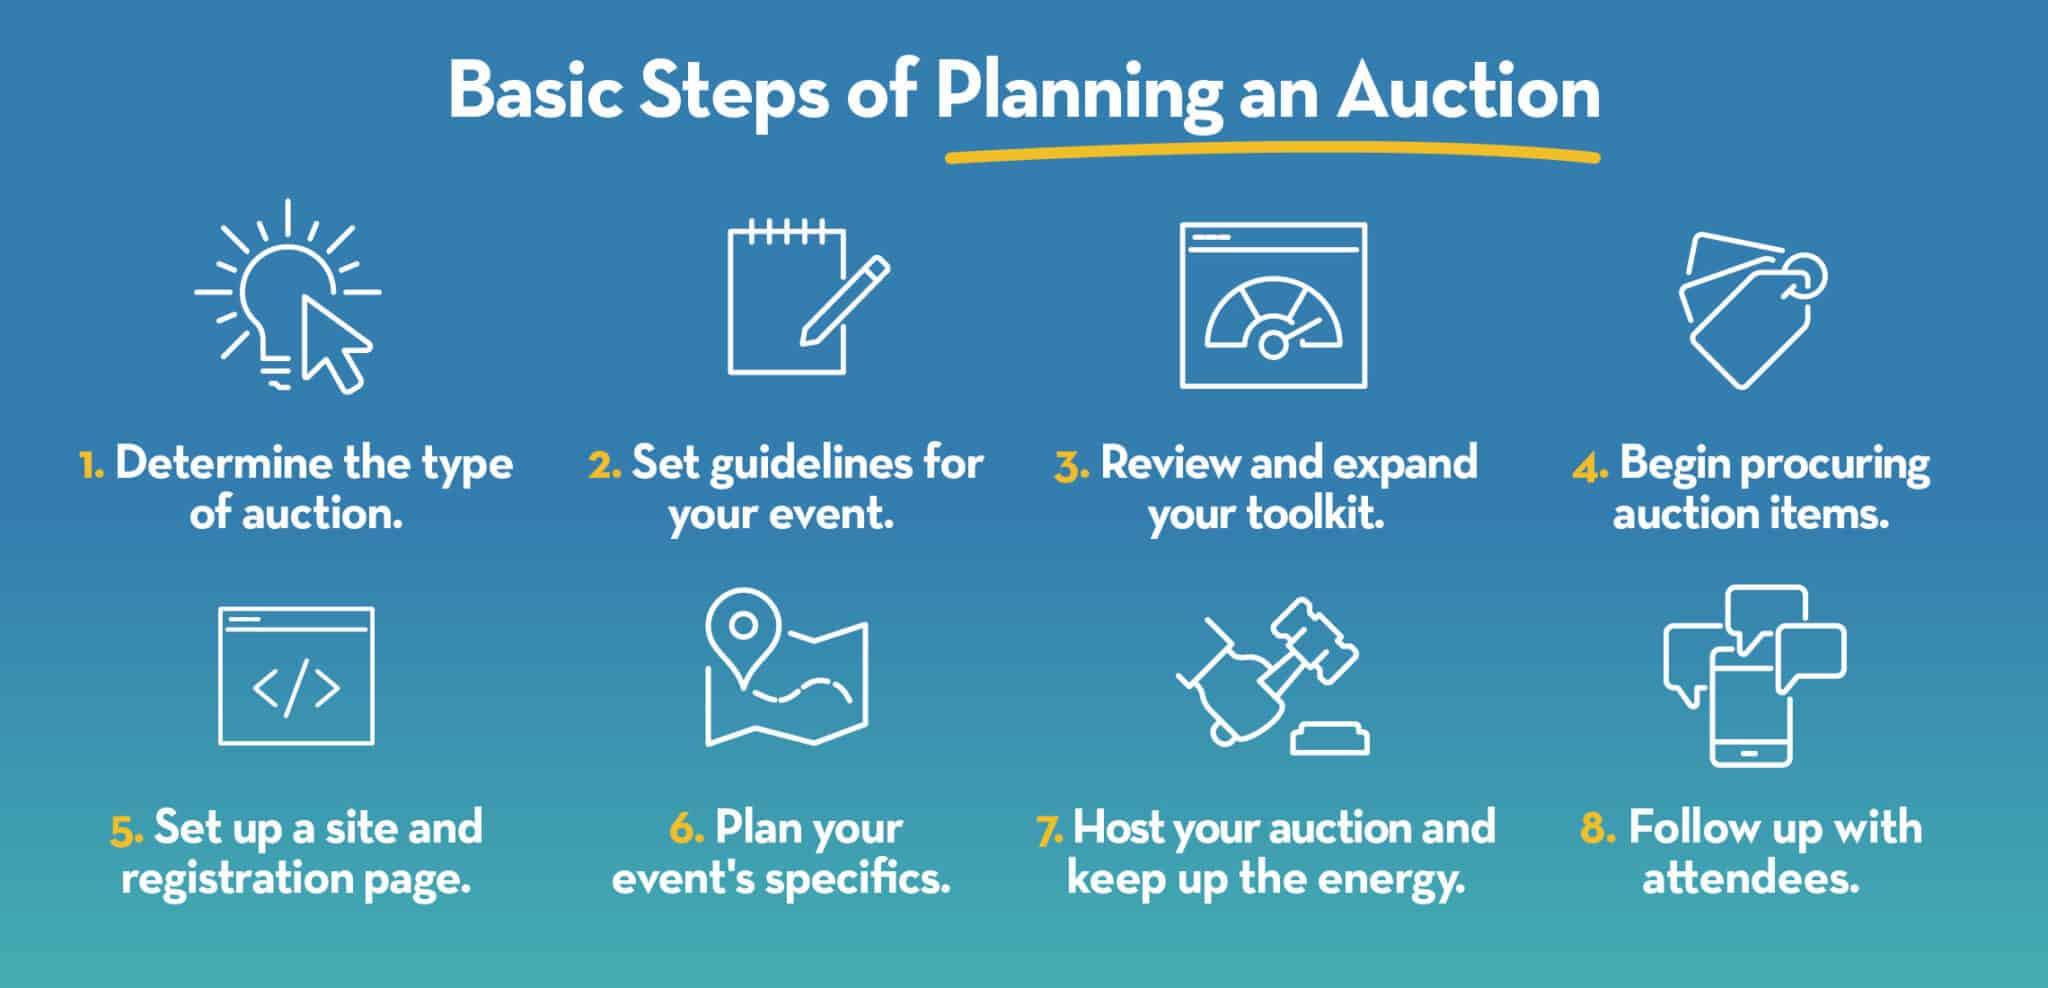 Basic steps of planning a silent auction